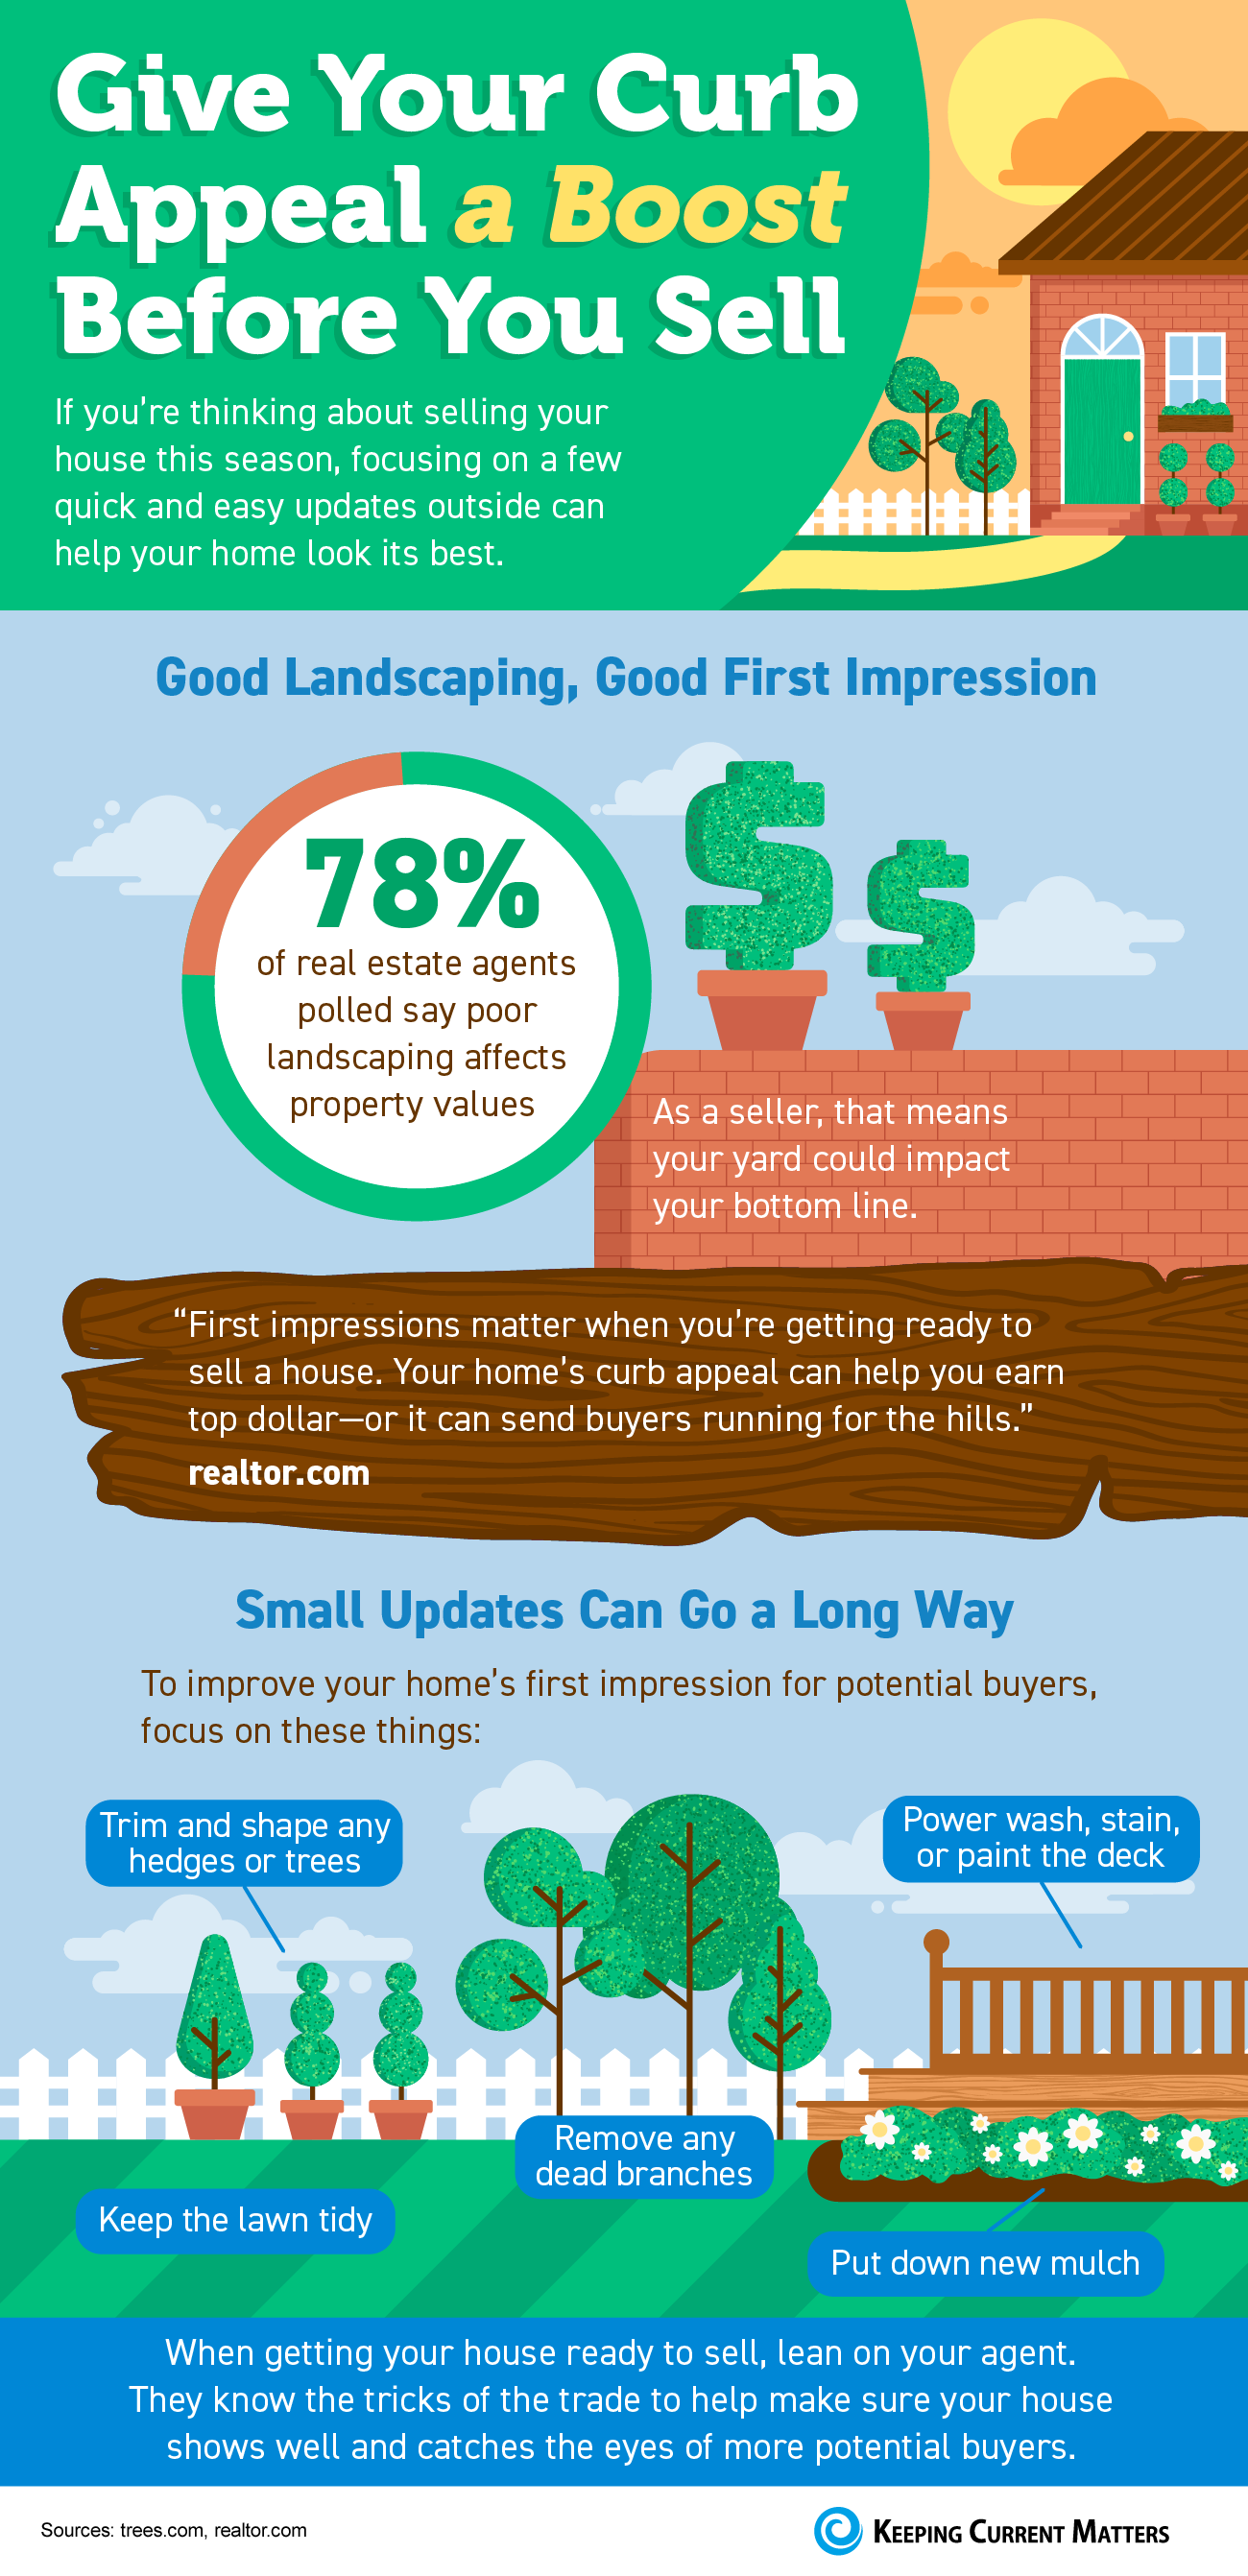 Give Your Curb Appeal a Boost Before You Sell [INFOGRAPHIC] | Keeping Current Matters